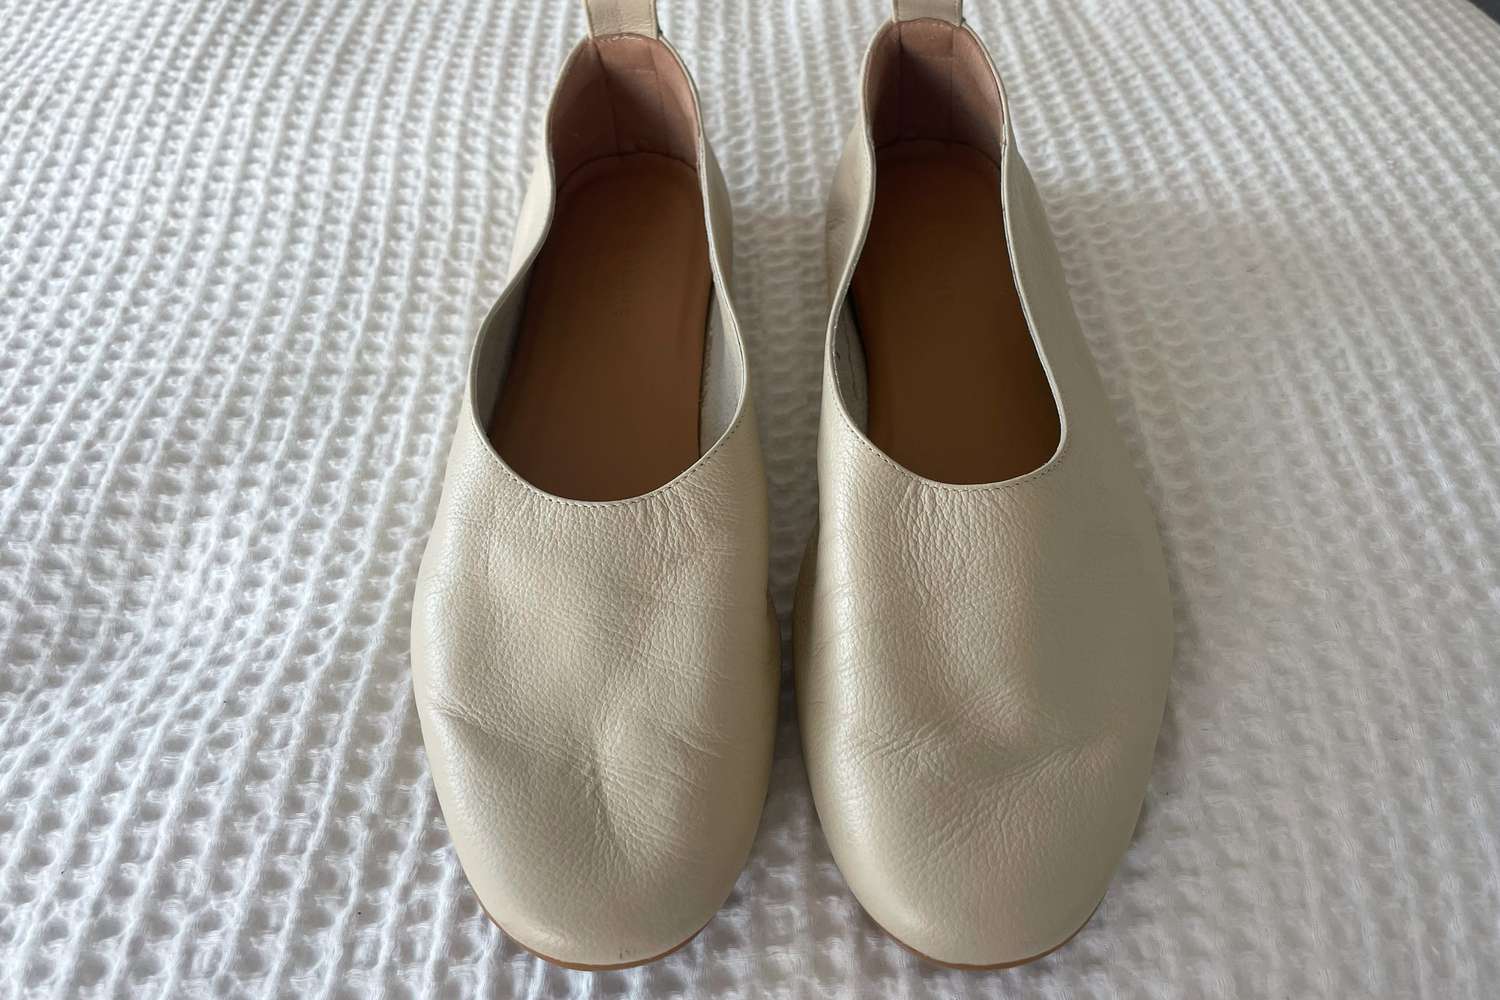 A pair of Everlane The Italian Leather Day Glove Flats